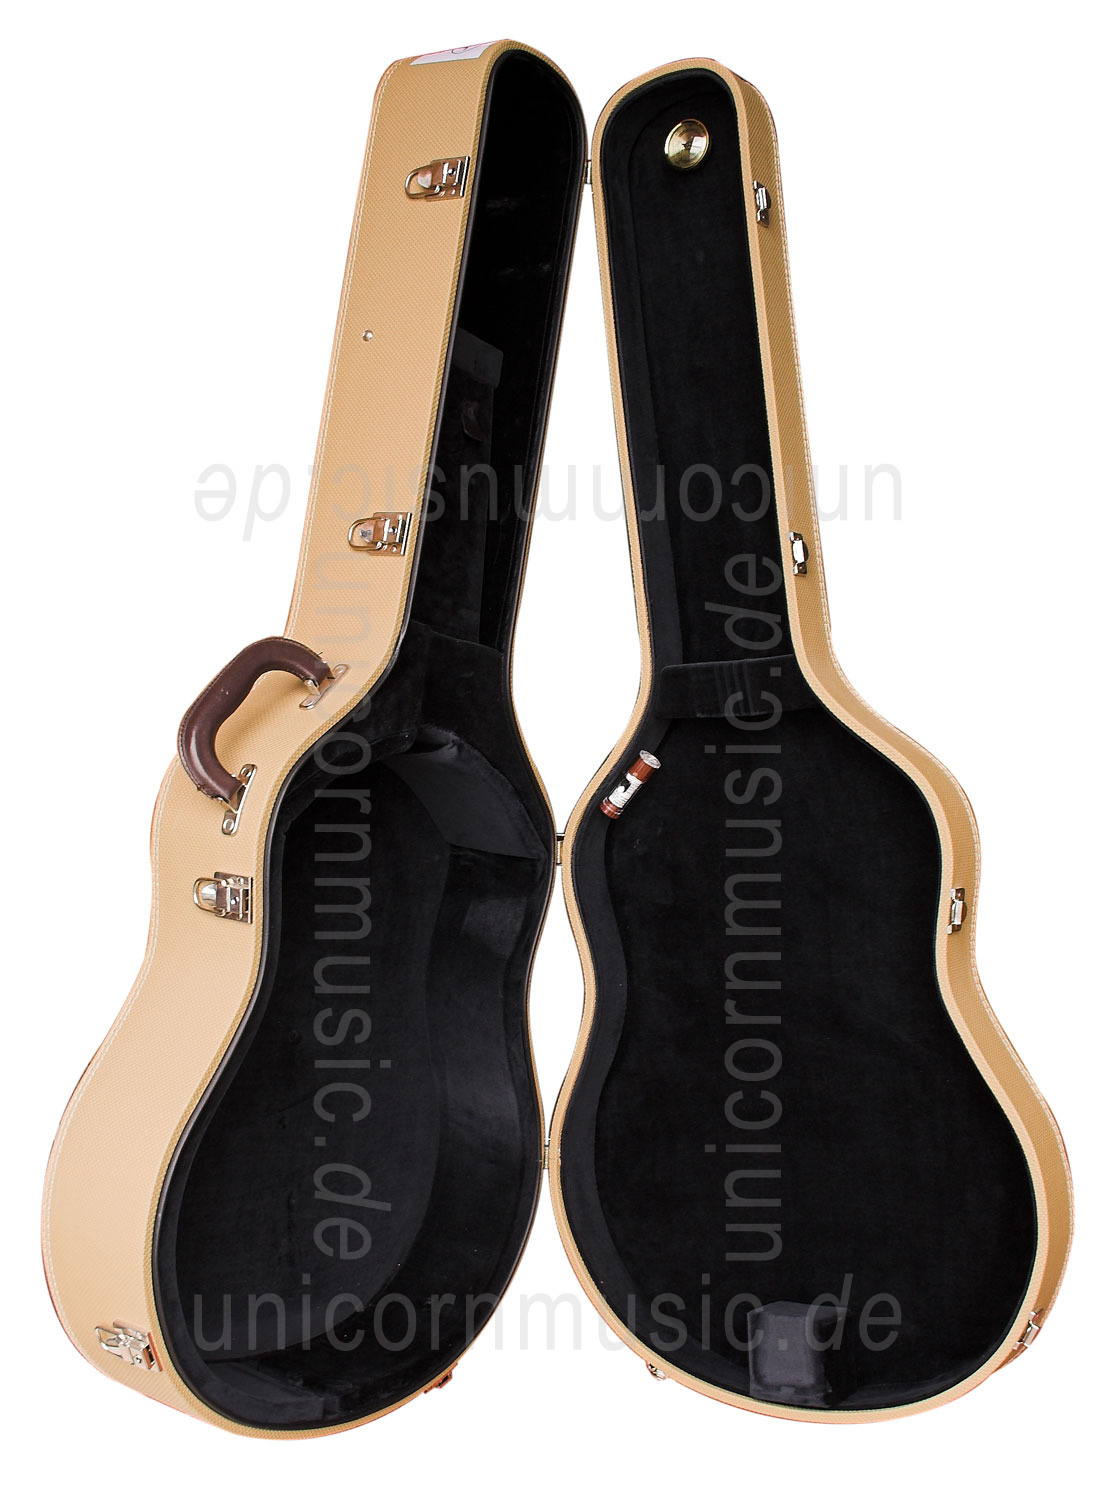 to article description / price Full-Resonance Archtop Jazz Guitar HOFNER NEW PRESIDENT HNP-N-0 + hardcase - solid spruce top